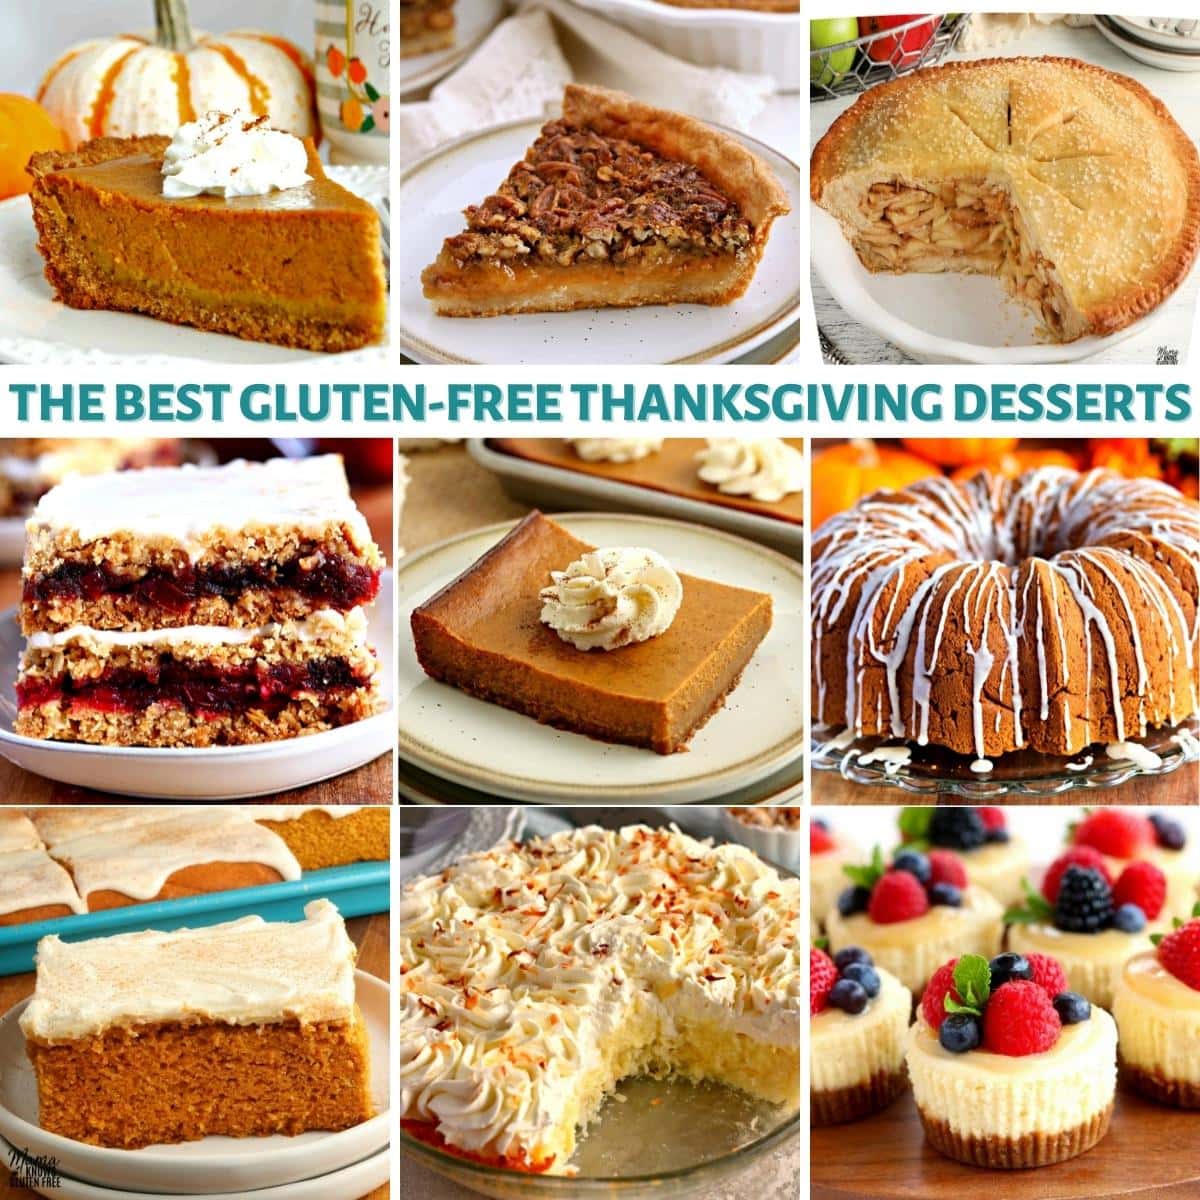 IV. Tips for Decorating Thanksgiving Cakes